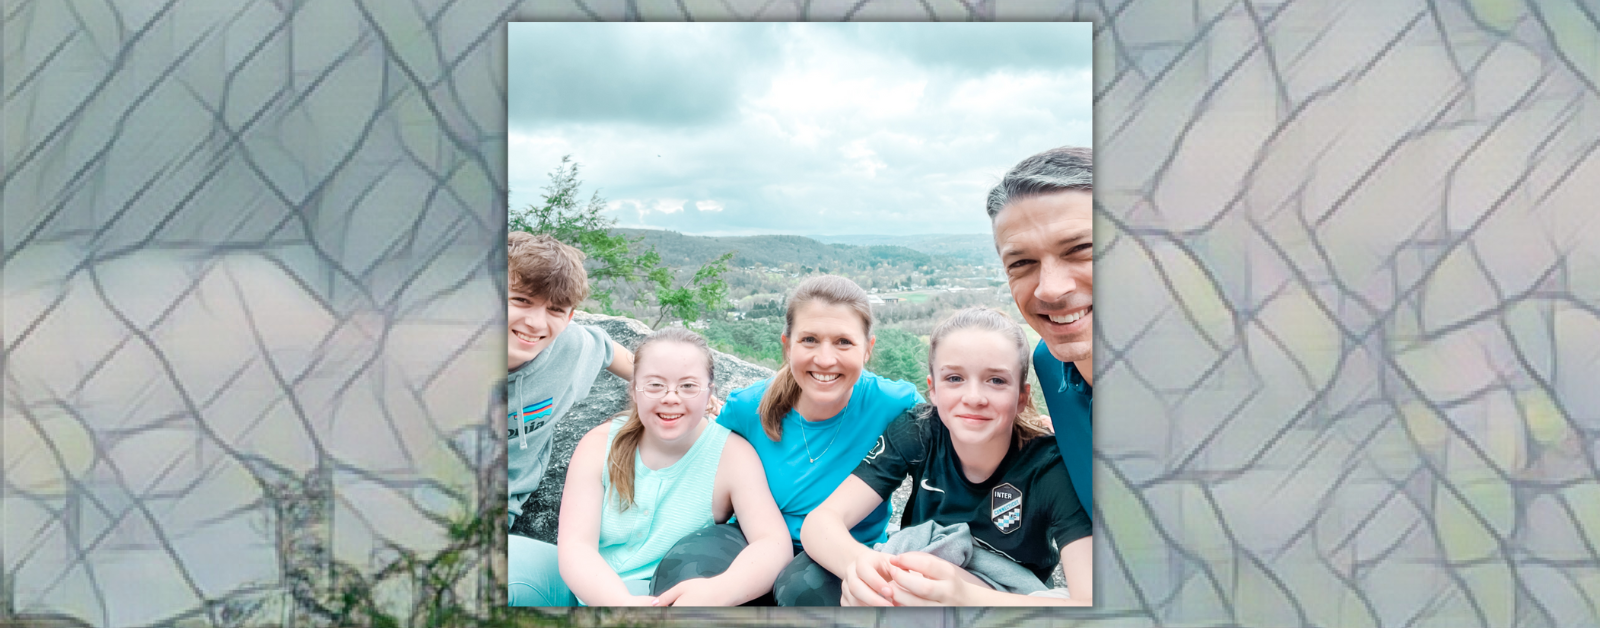 William, Penny, Amy Julia, Marilee, and Peter smile for a selfie on a rock outcropping overlooking a valley